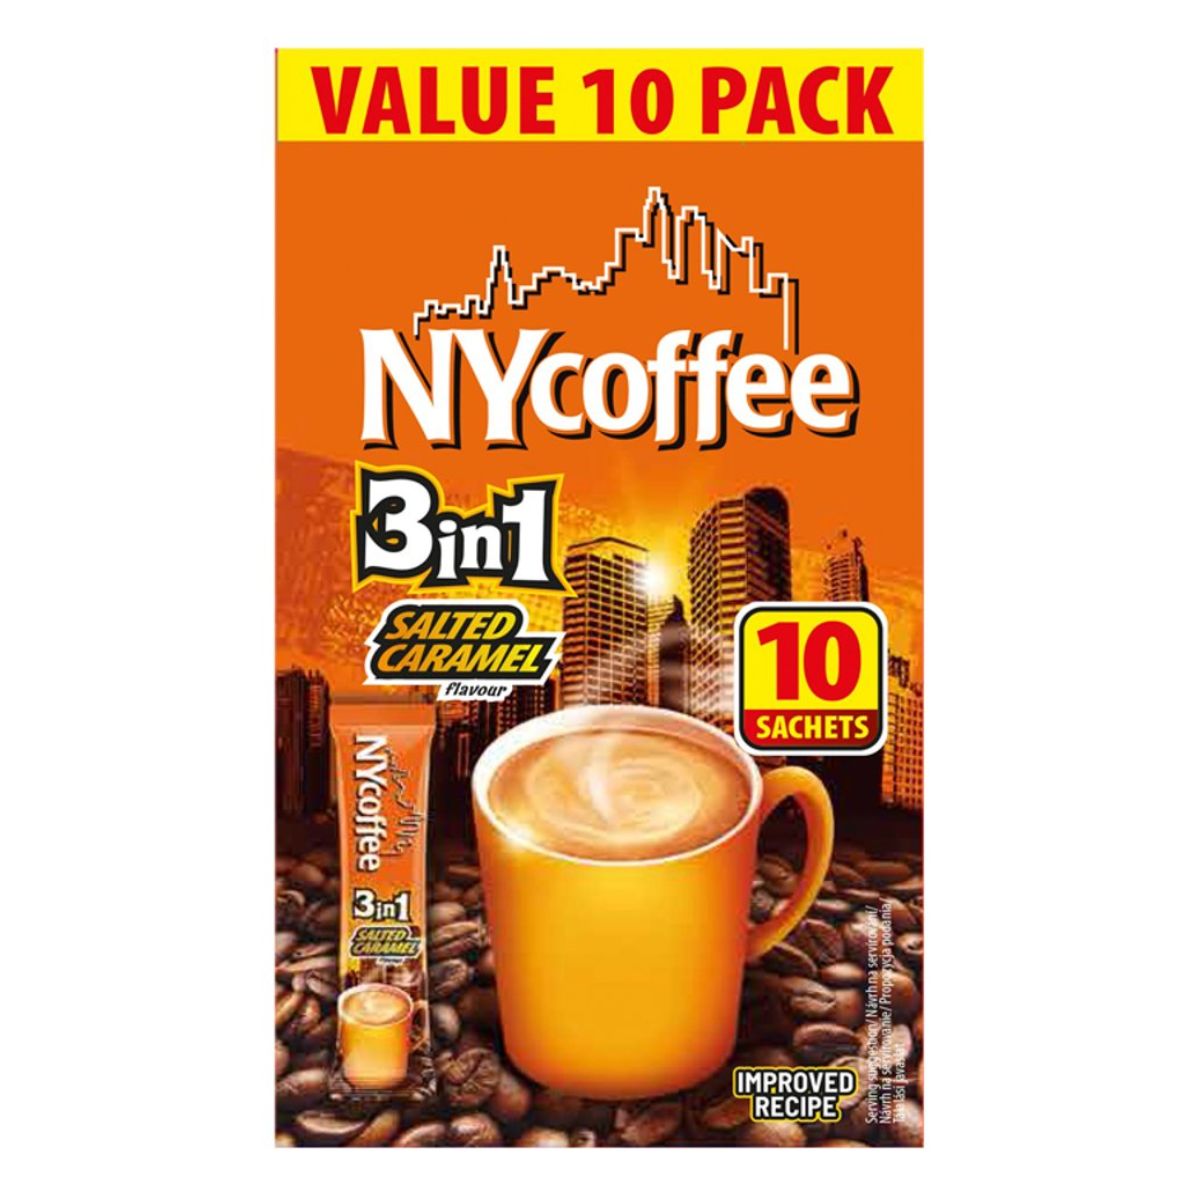 NY Coffee - 3in1 Salted Caramel Flavour - 10sachets - 10 pack.